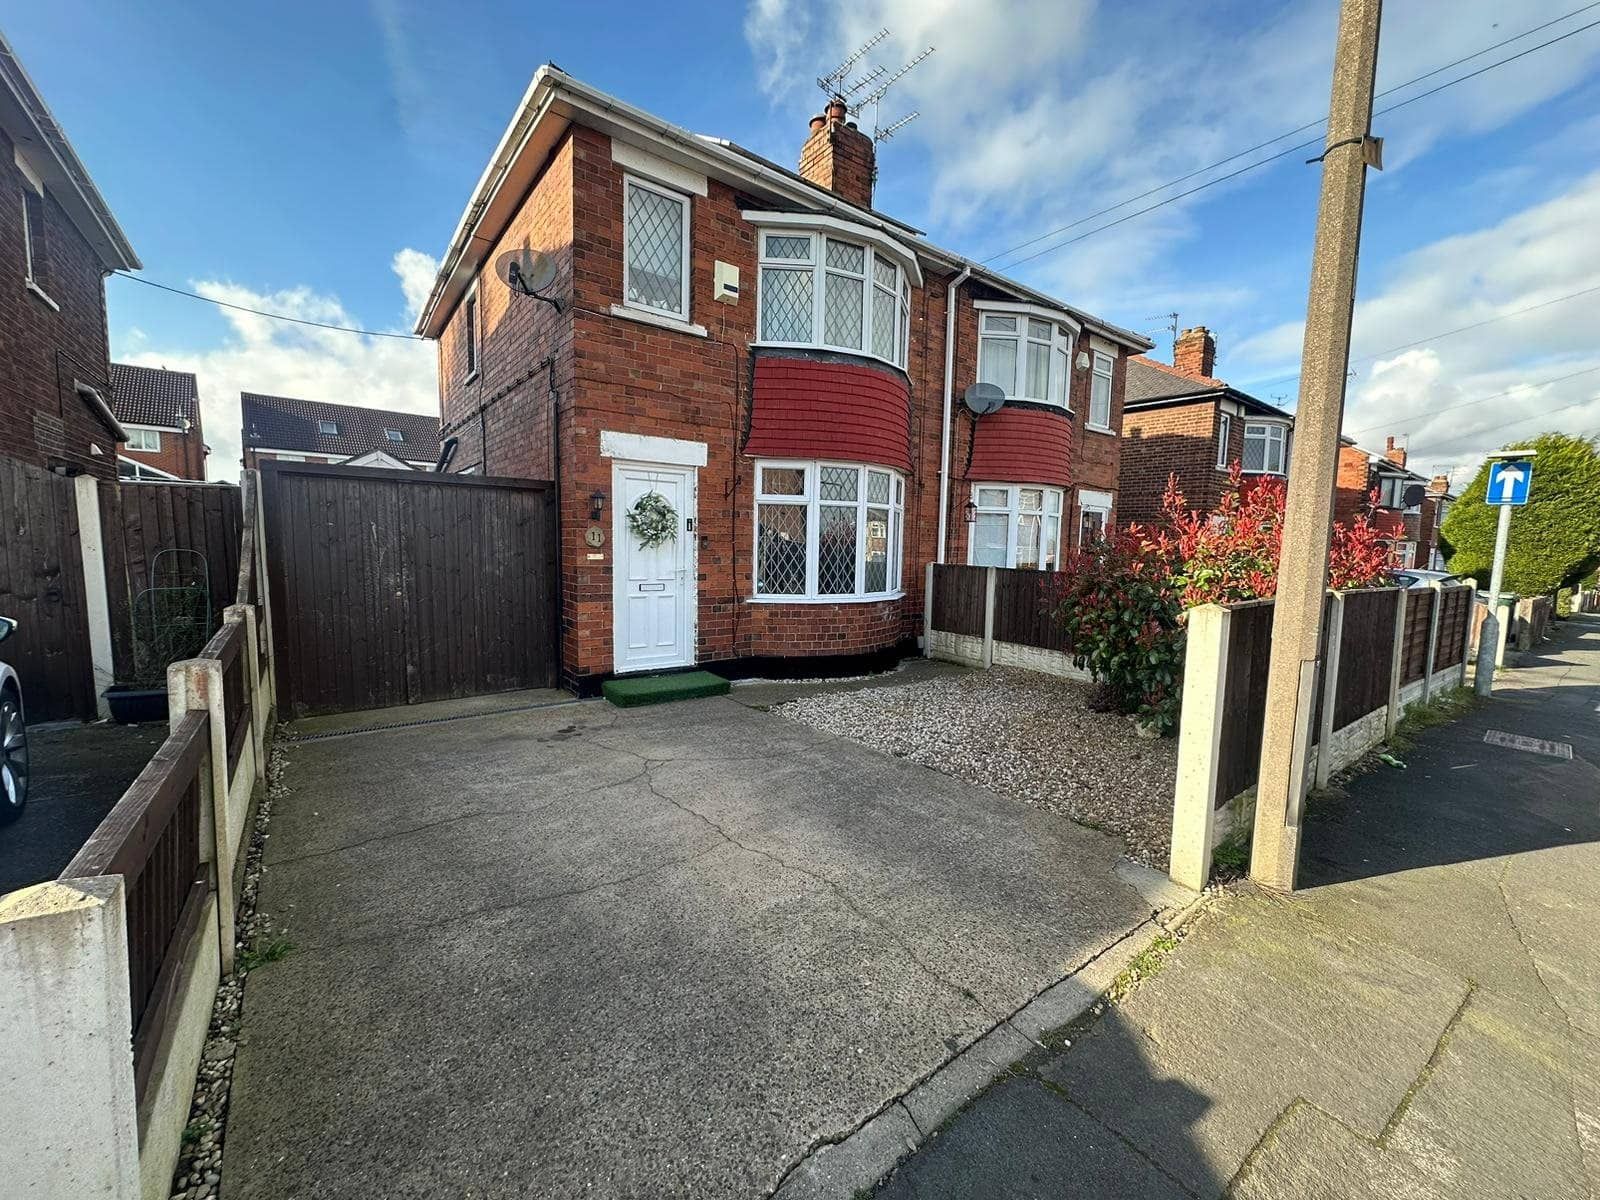 Rosedale Road, Scawsby, Doncaster, DN5 8SU